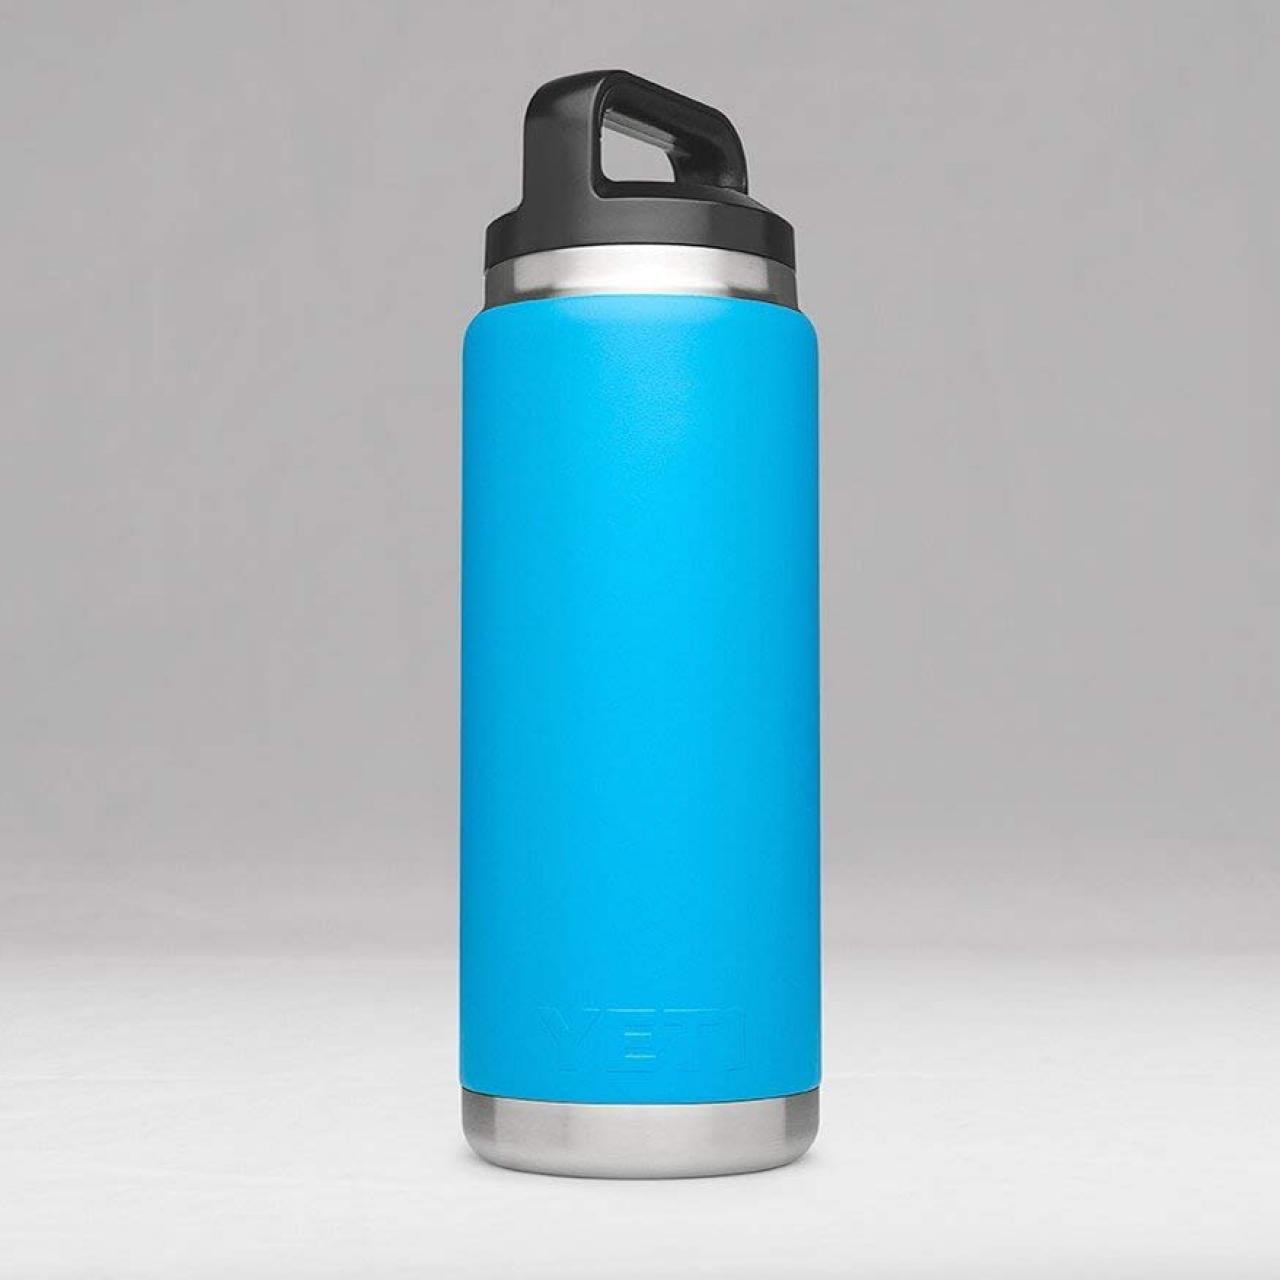 Zulu Athletic Glass water bottle review & Giveaway